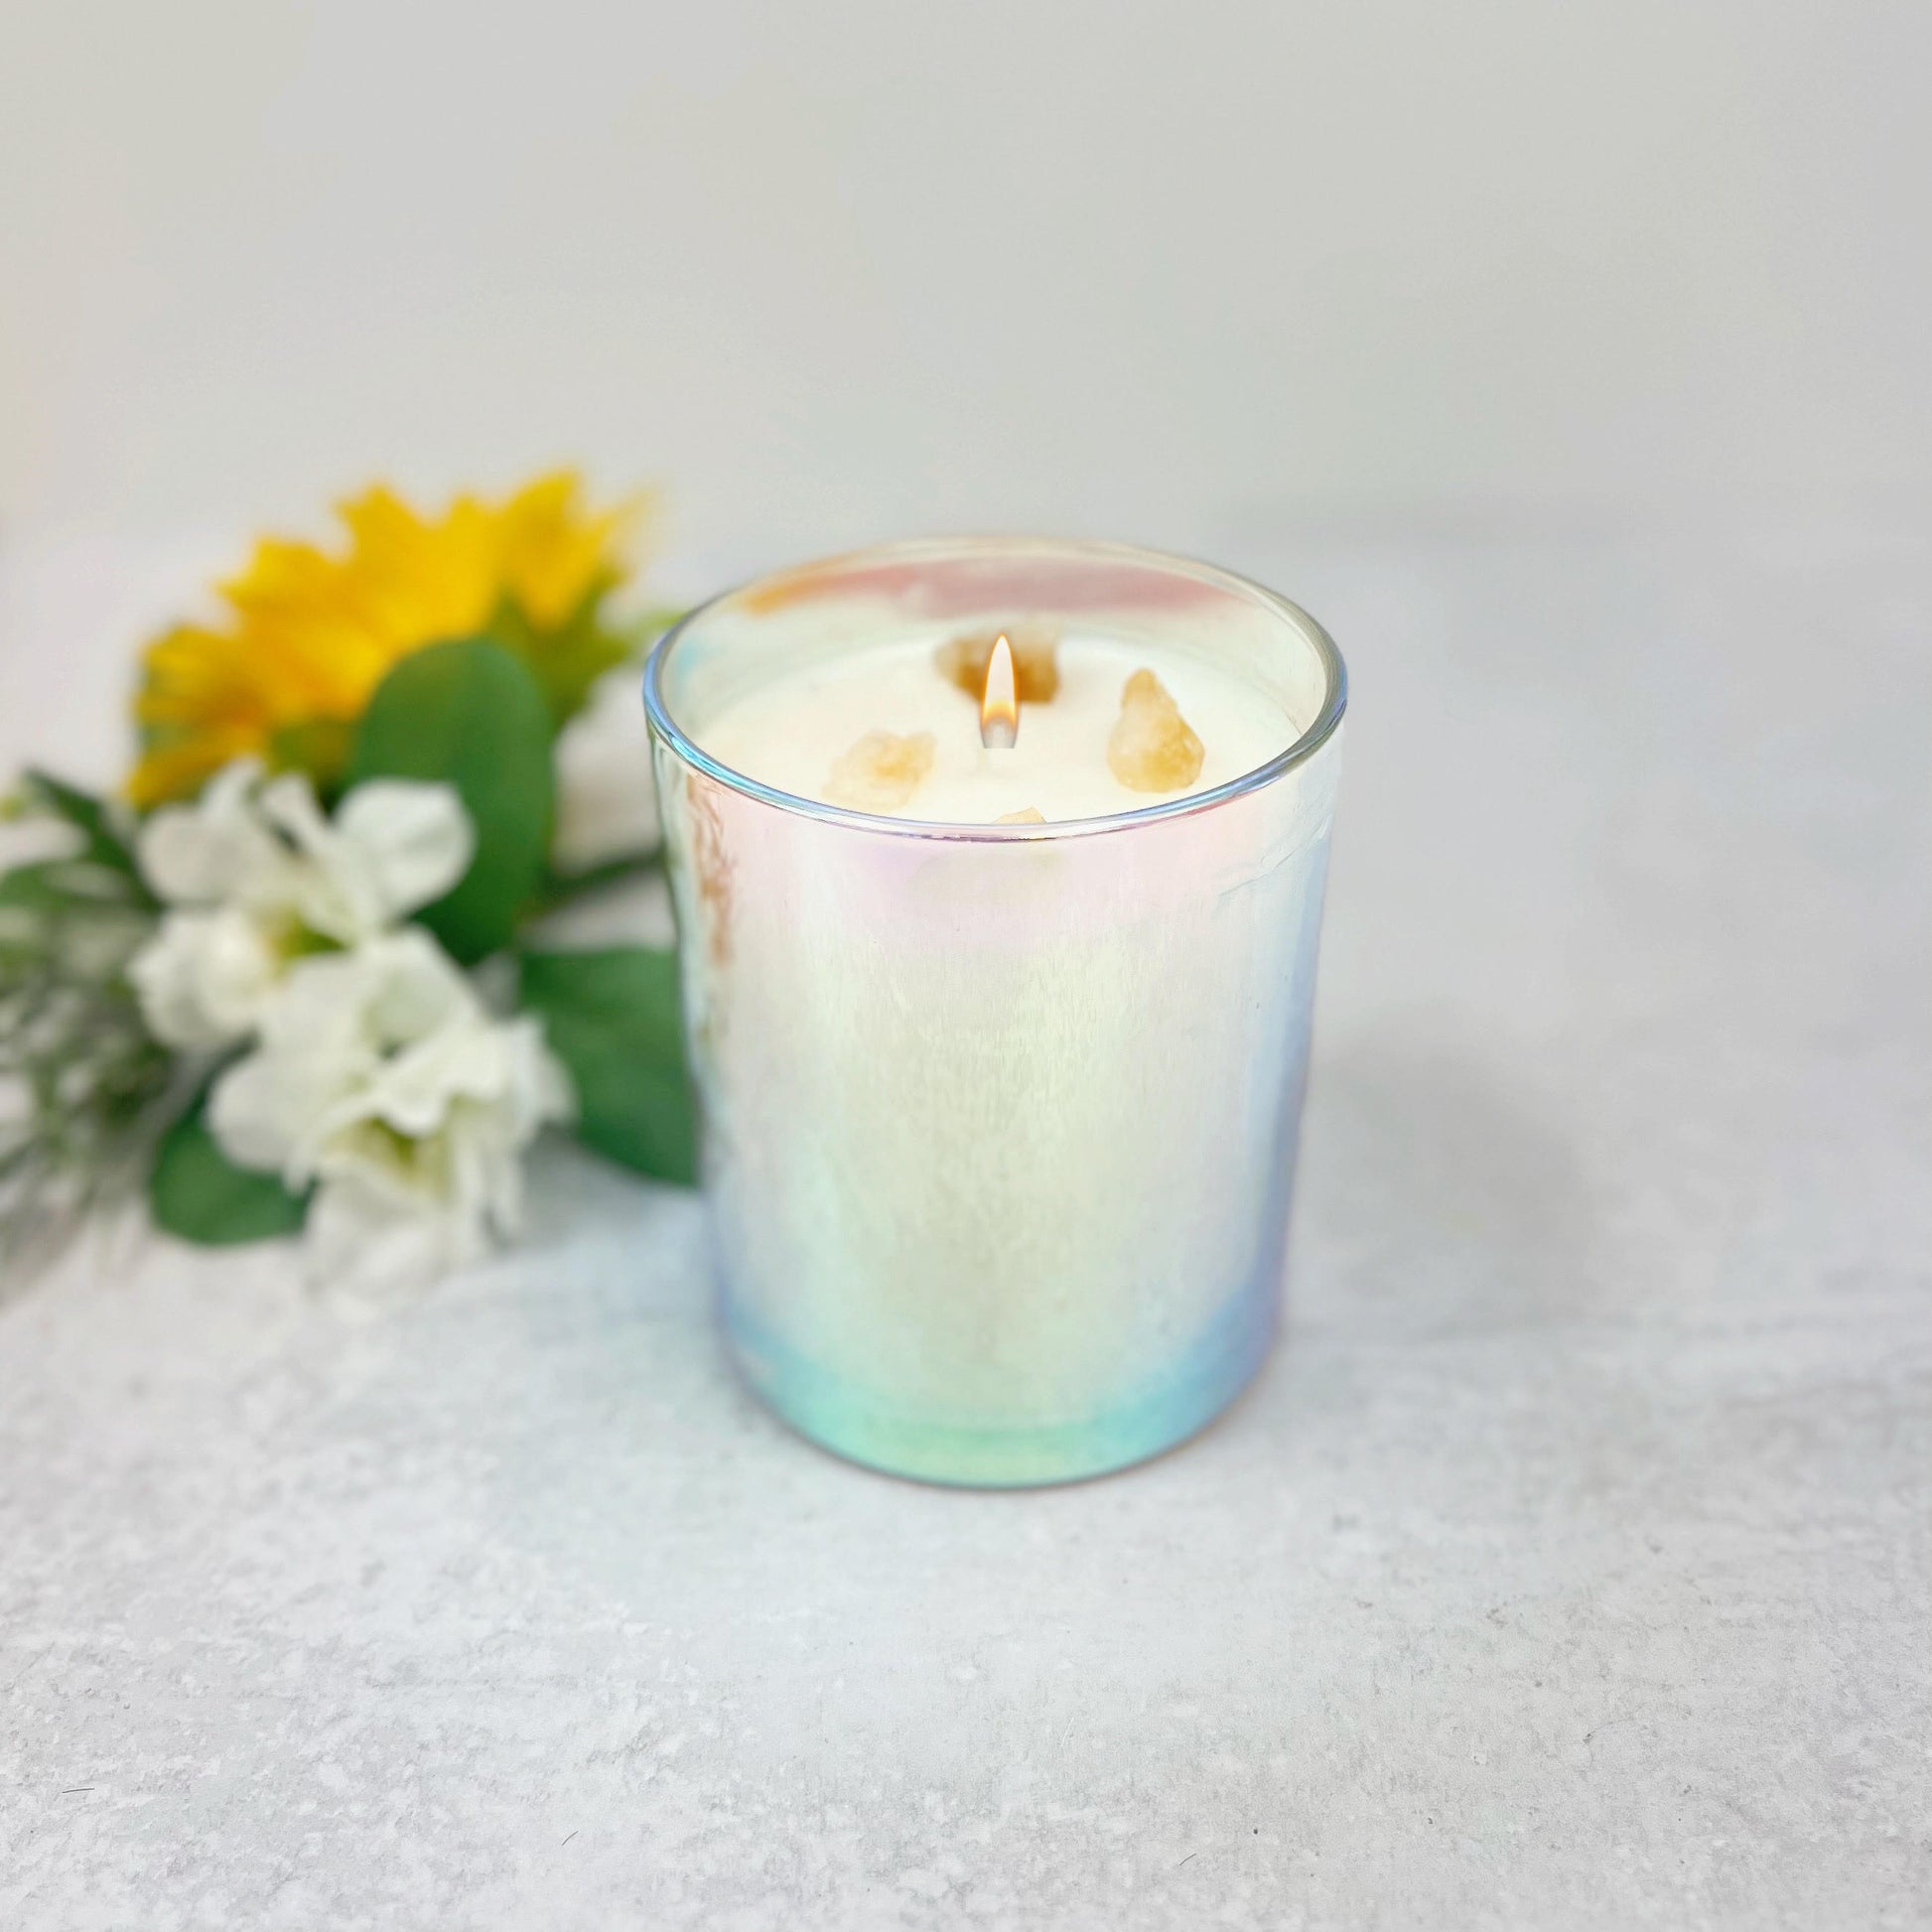 Custom Scented Crystal Candle - The Fairy Dust Jar - The Mystical Moon  Online Store